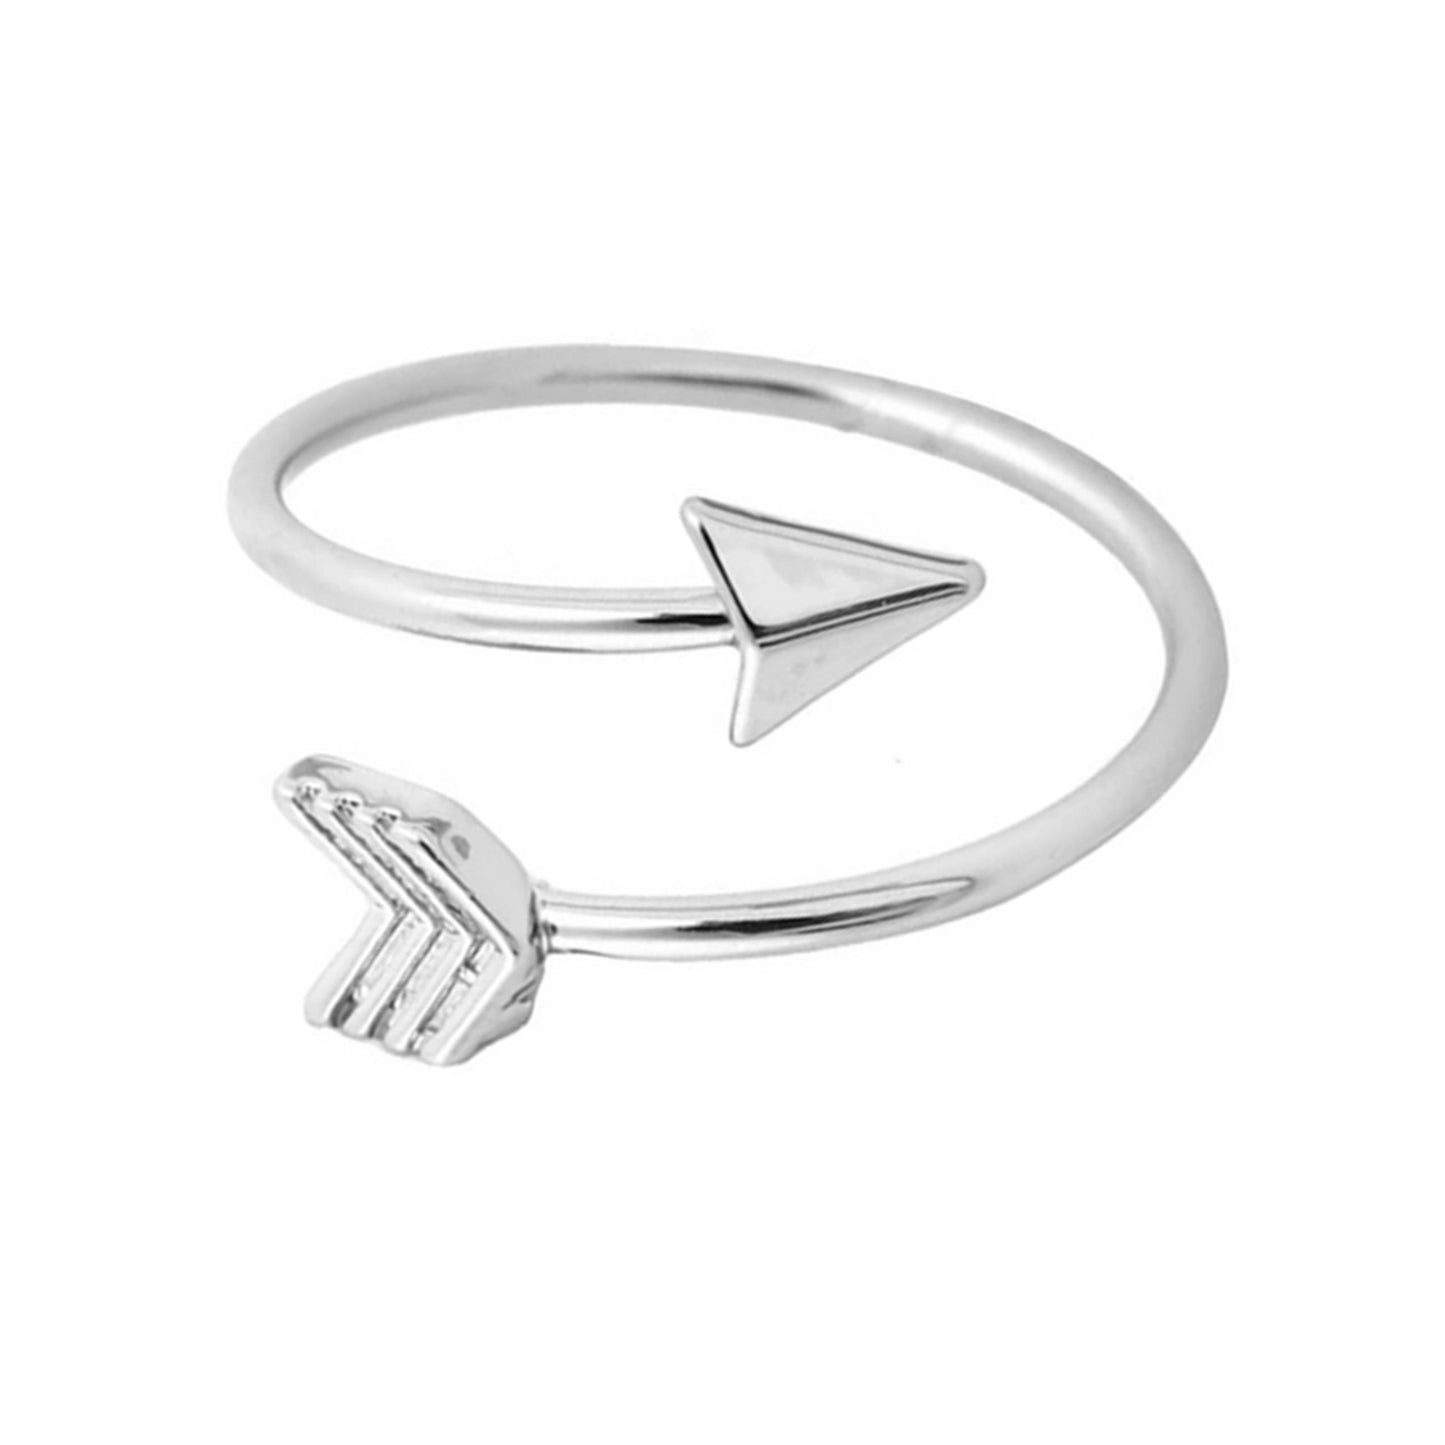 Purpose Arrow Empowerment Adjustable Ring - Silver - Cheer and Dance On Demand